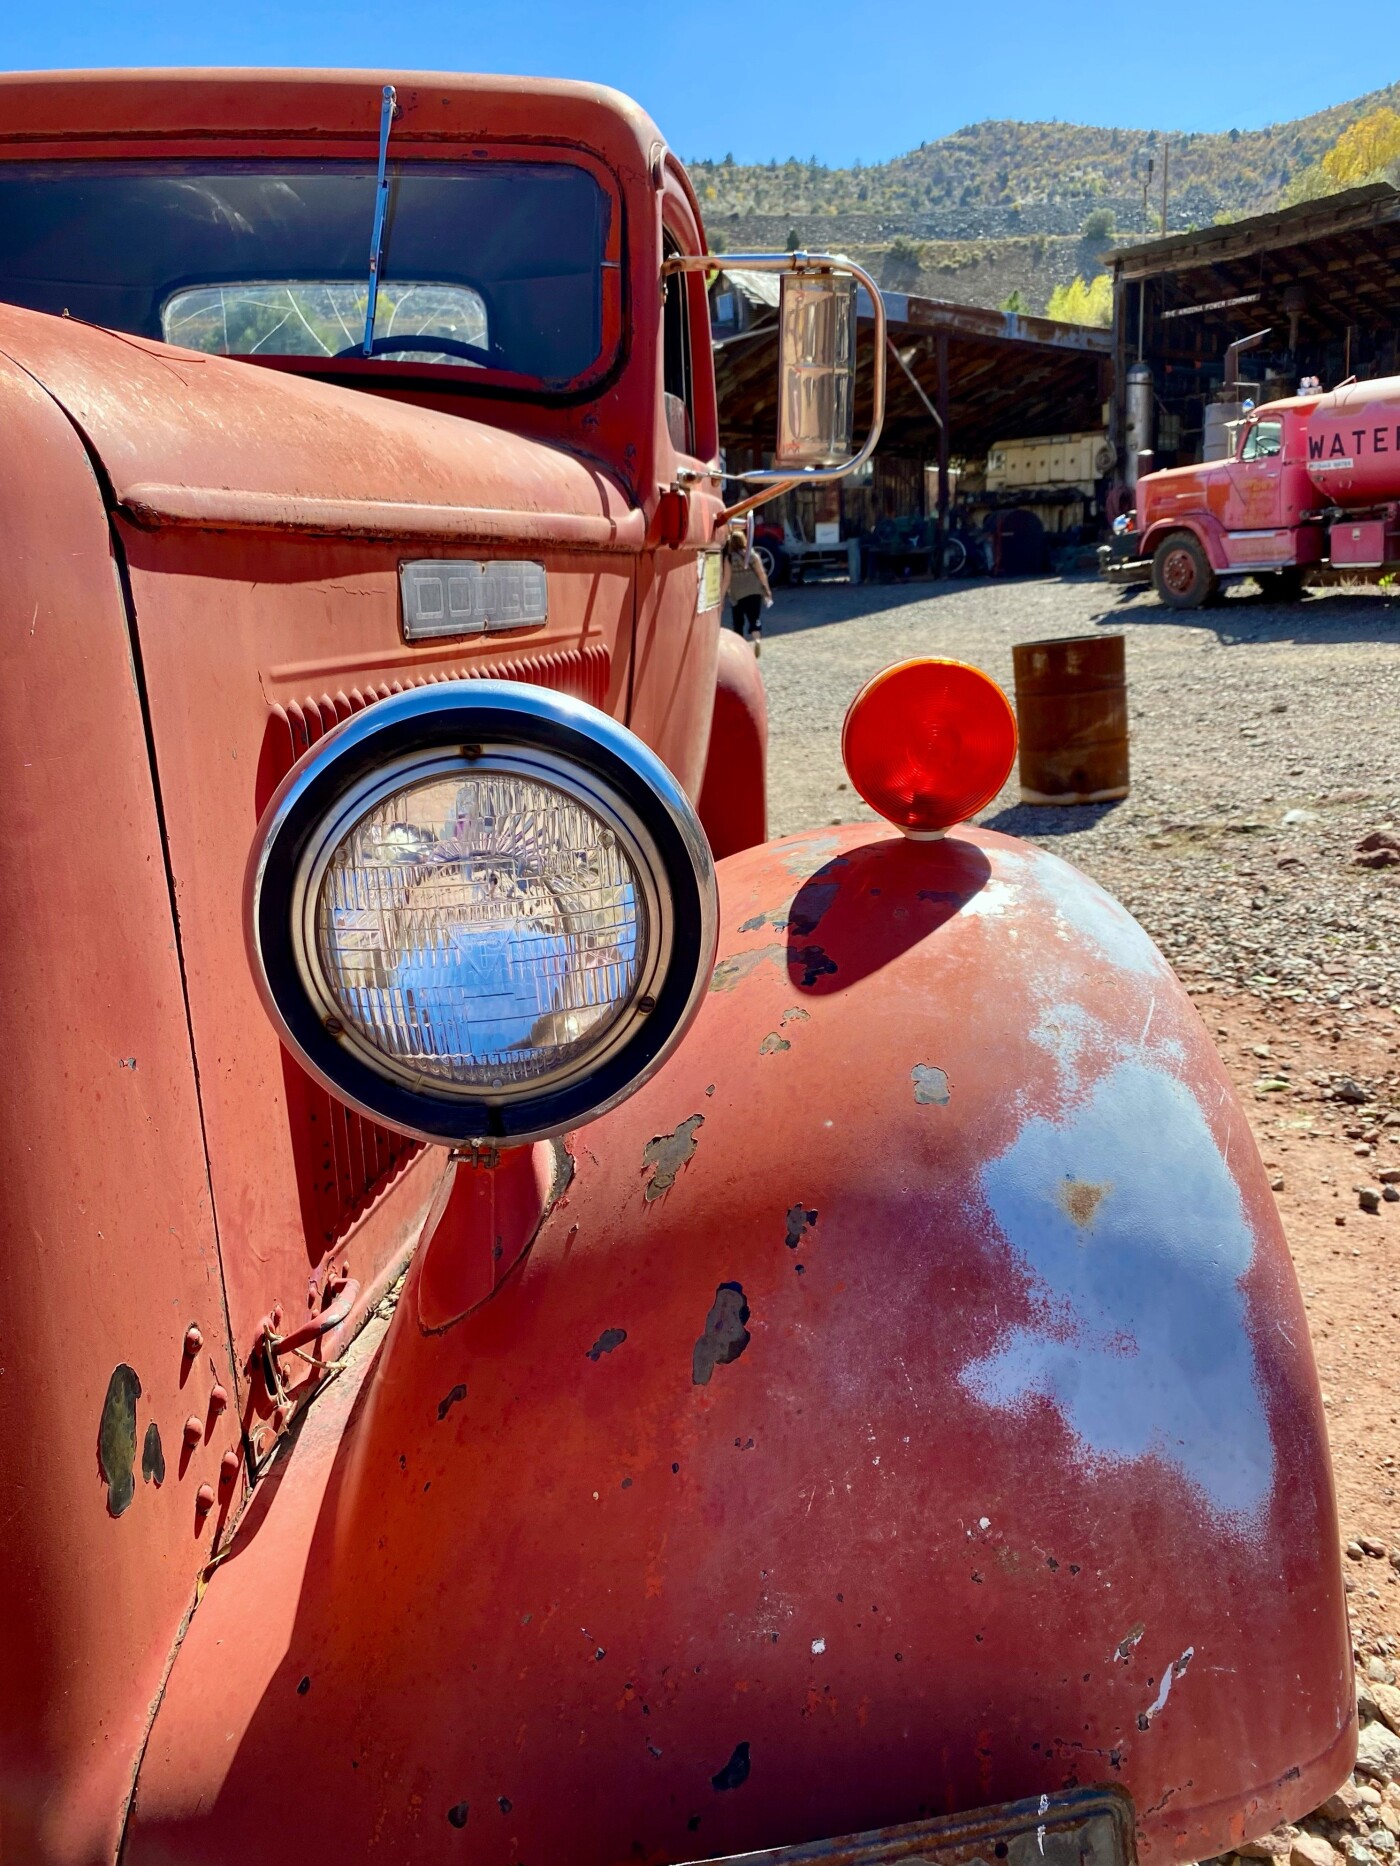 I always love to photograph old autos. This was captured at The Gold King Mine near Jerome, AZ, the...